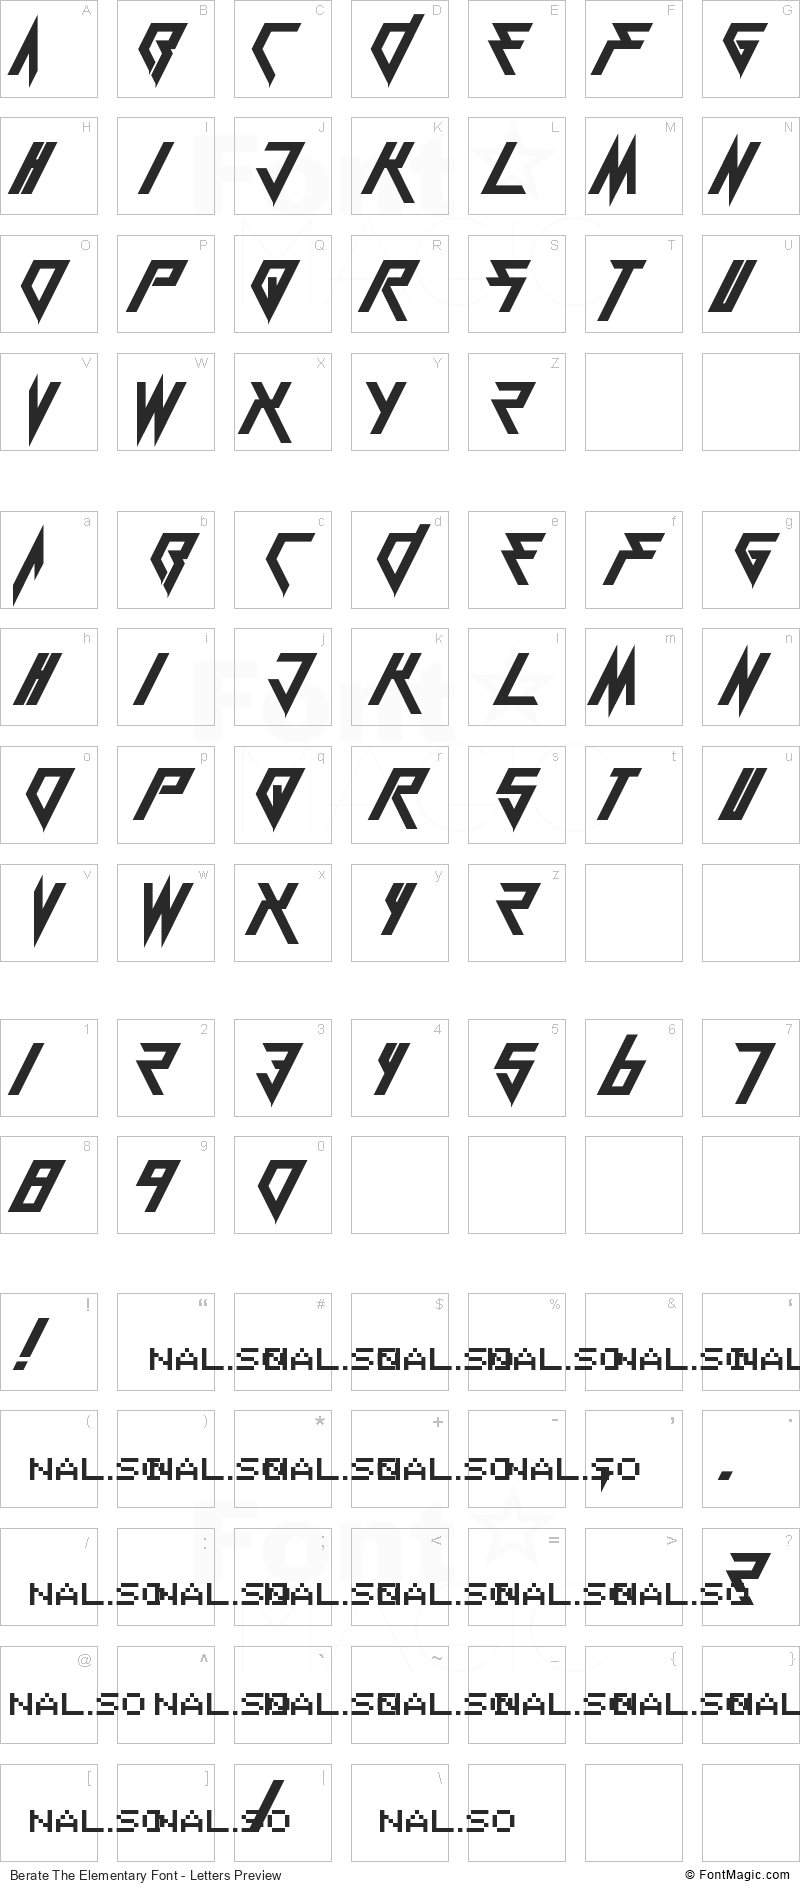 Berate The Elementary Font - All Latters Preview Chart